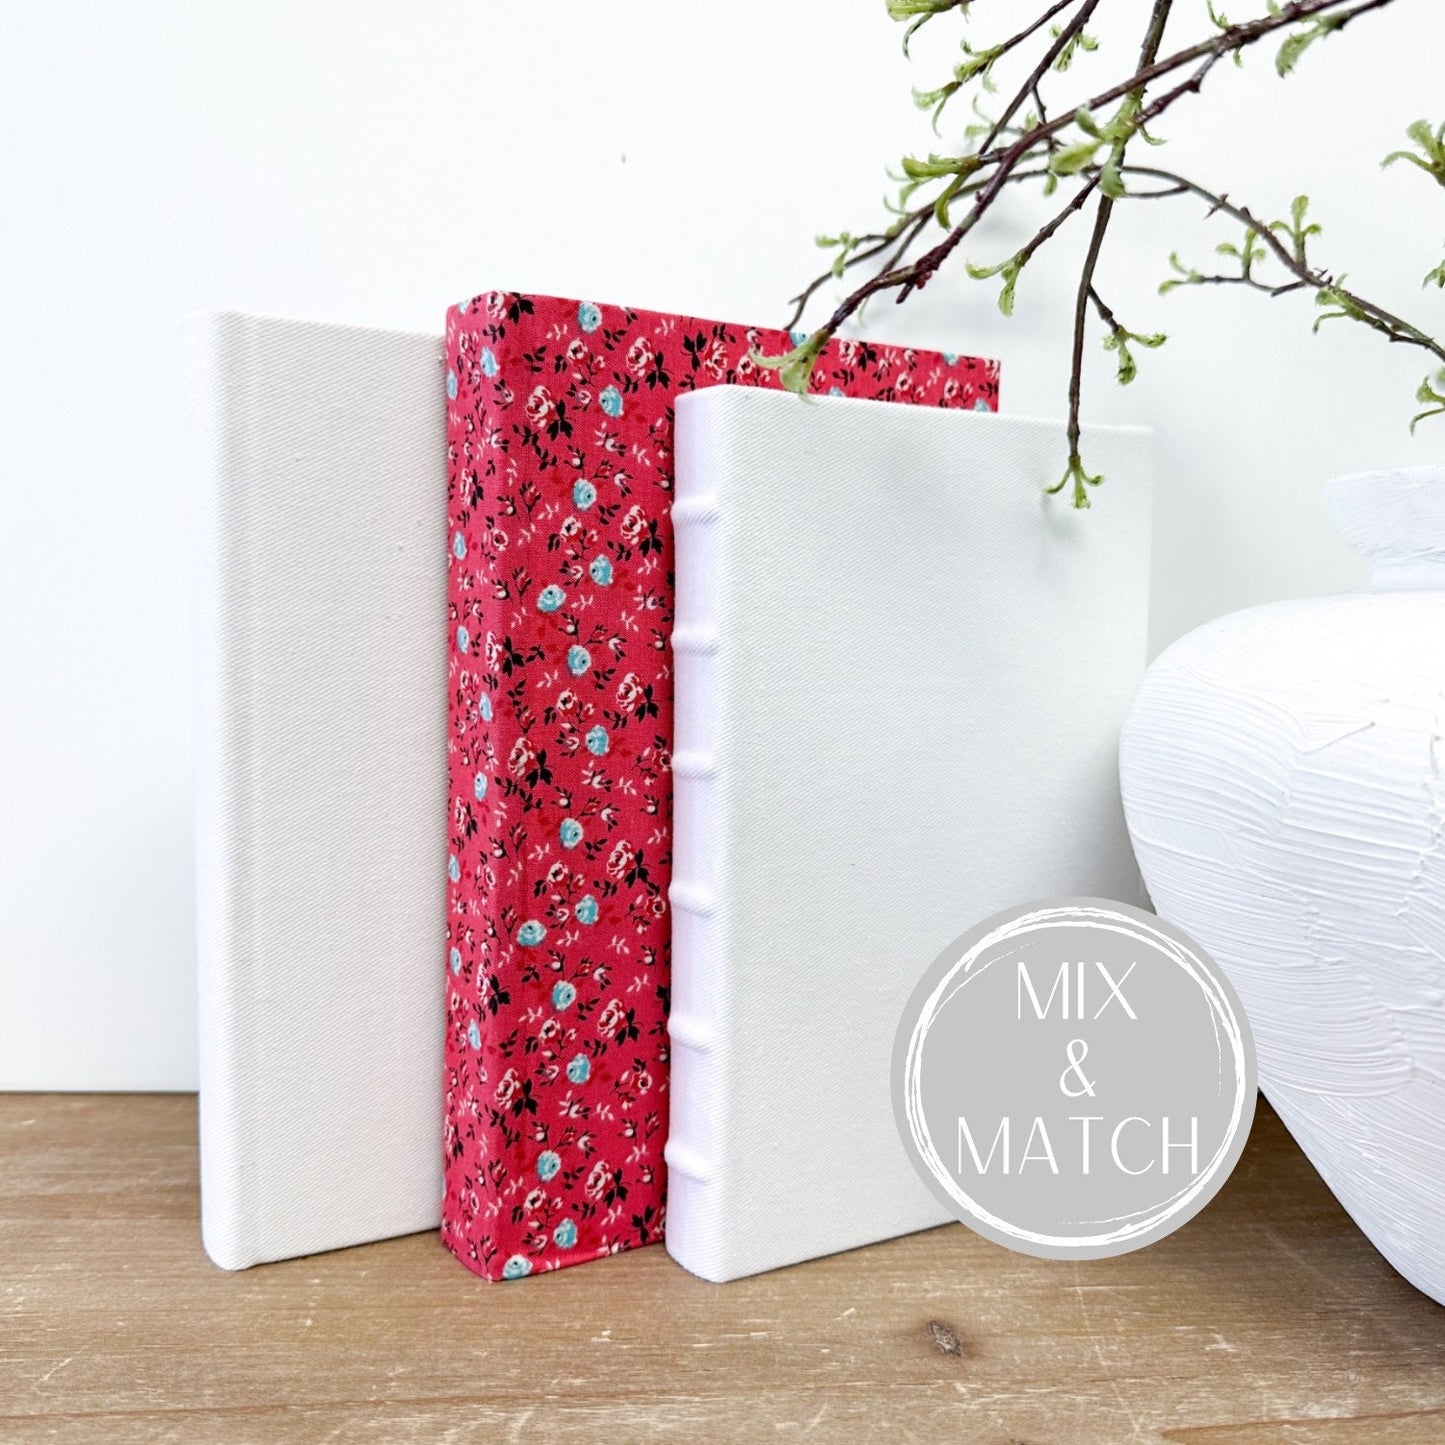 Books by Color, Fabric Covered Books, Farmhouse Style, Red Home Decor